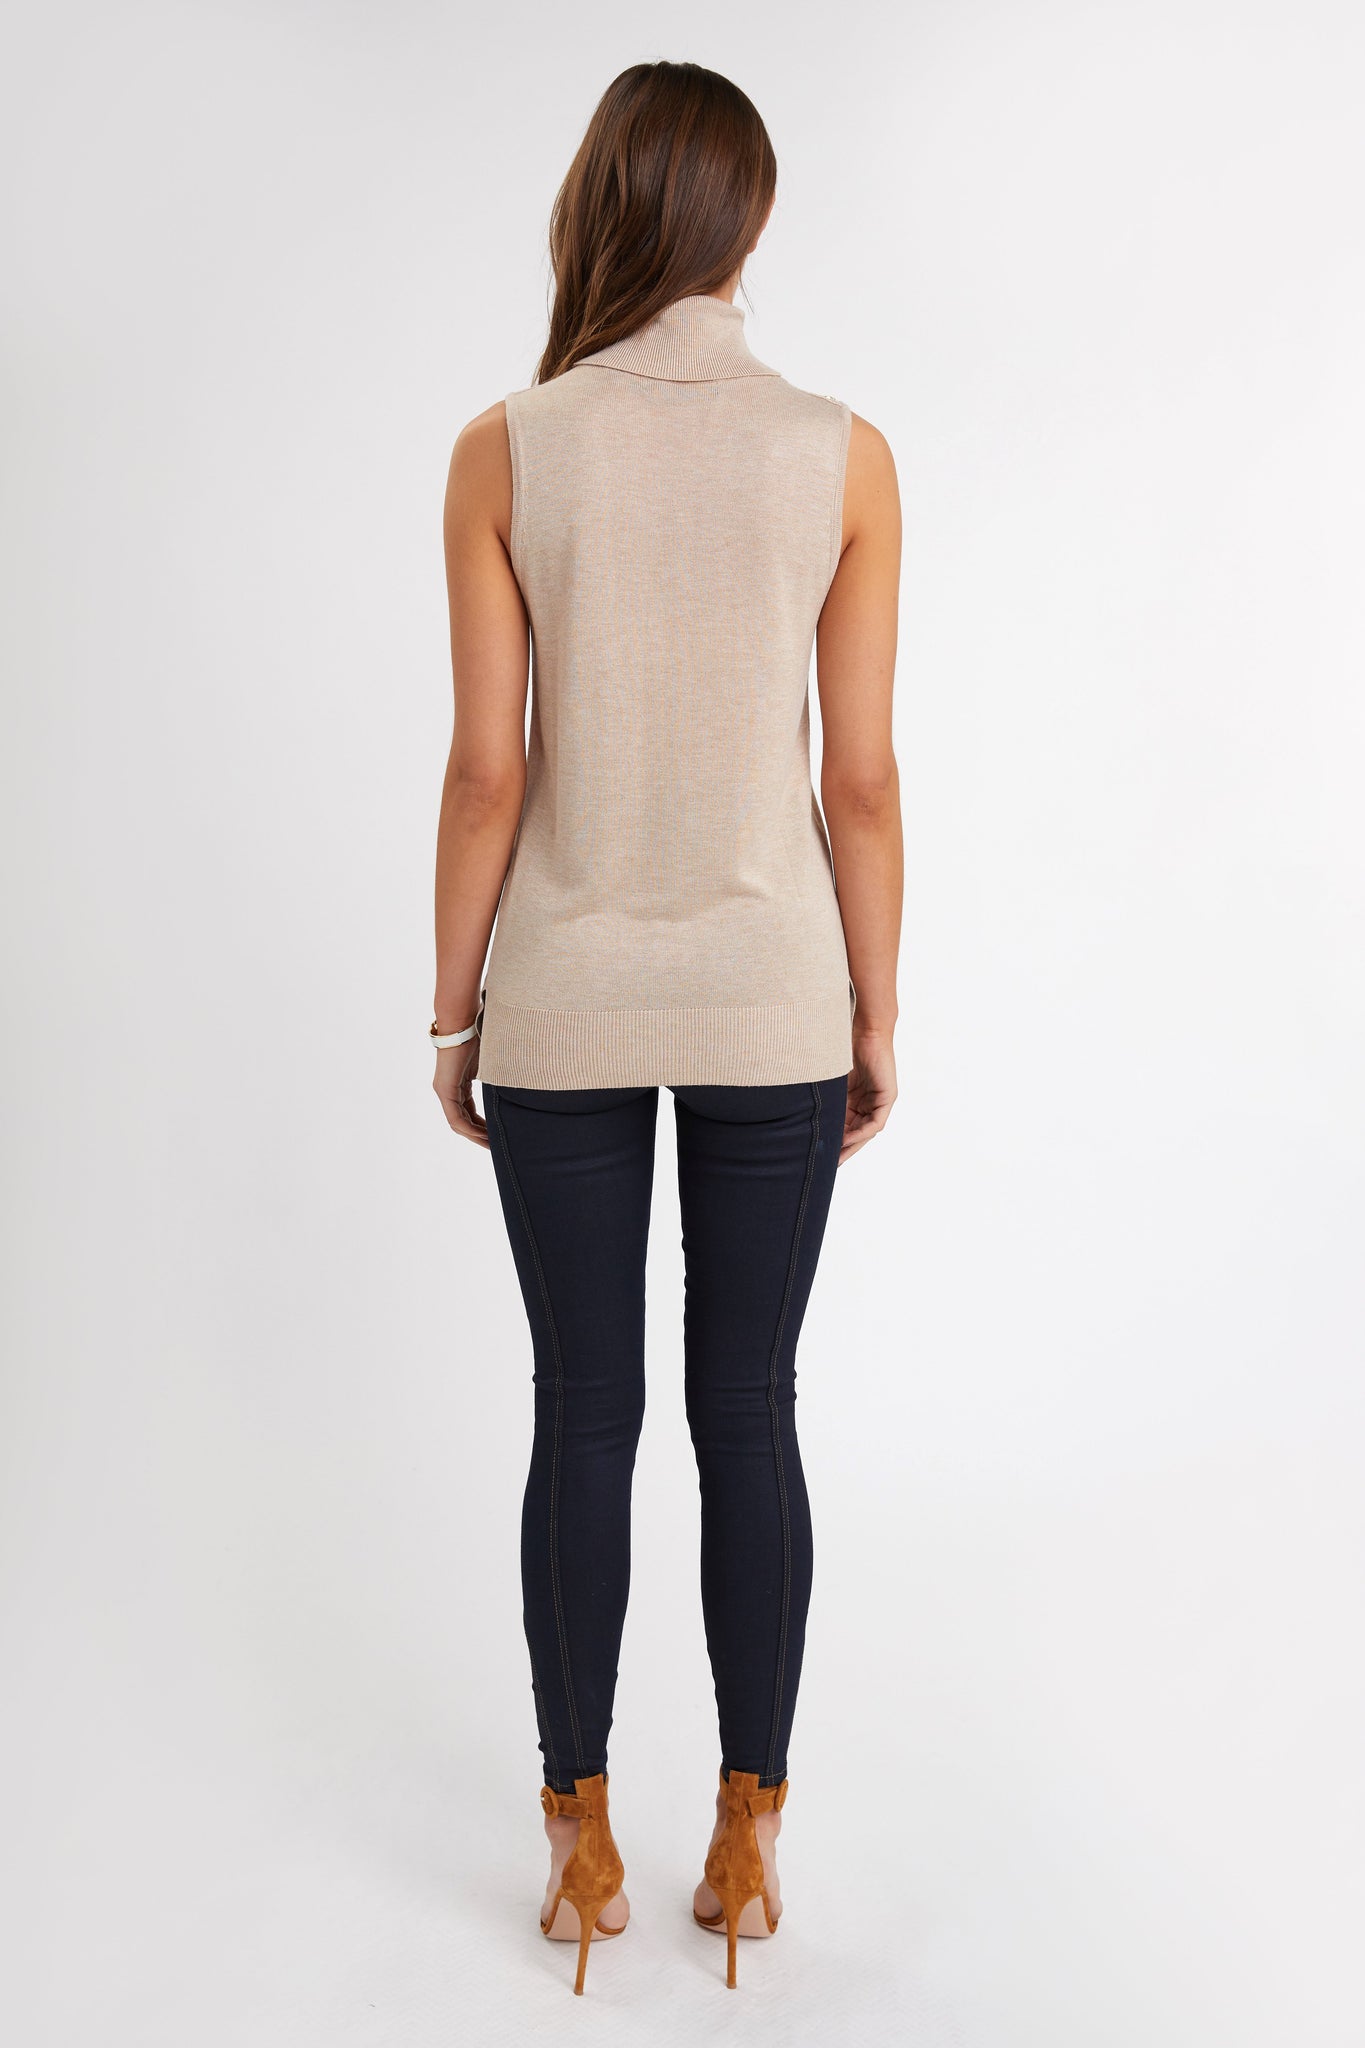 back of fitted lightweight sleeveless rollneck knit in camel with gold button detail across shoulders